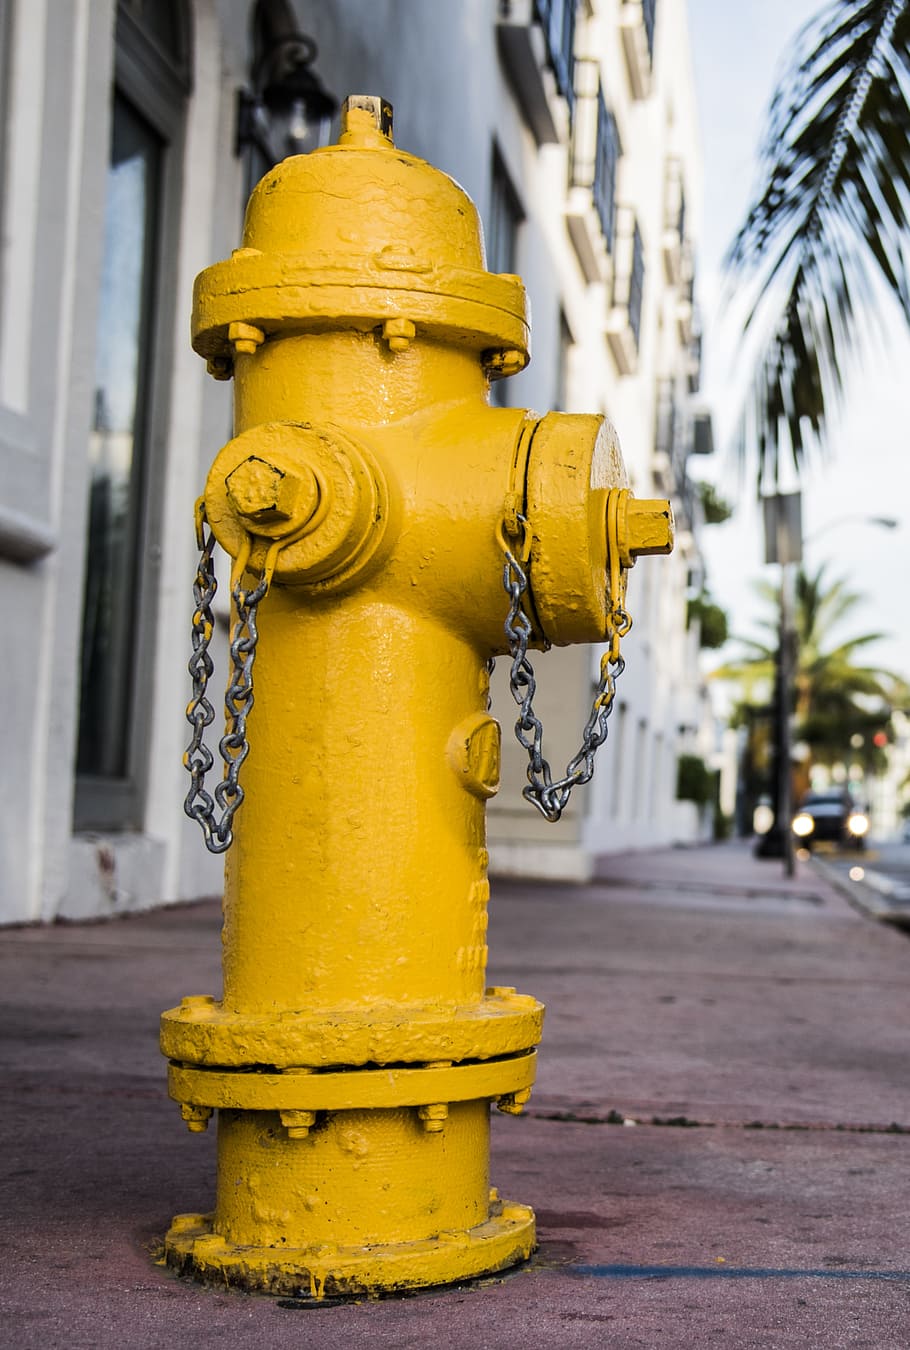 fire, water, fire hydrant, danger, flames, hose, turn out, braces water, miami, street